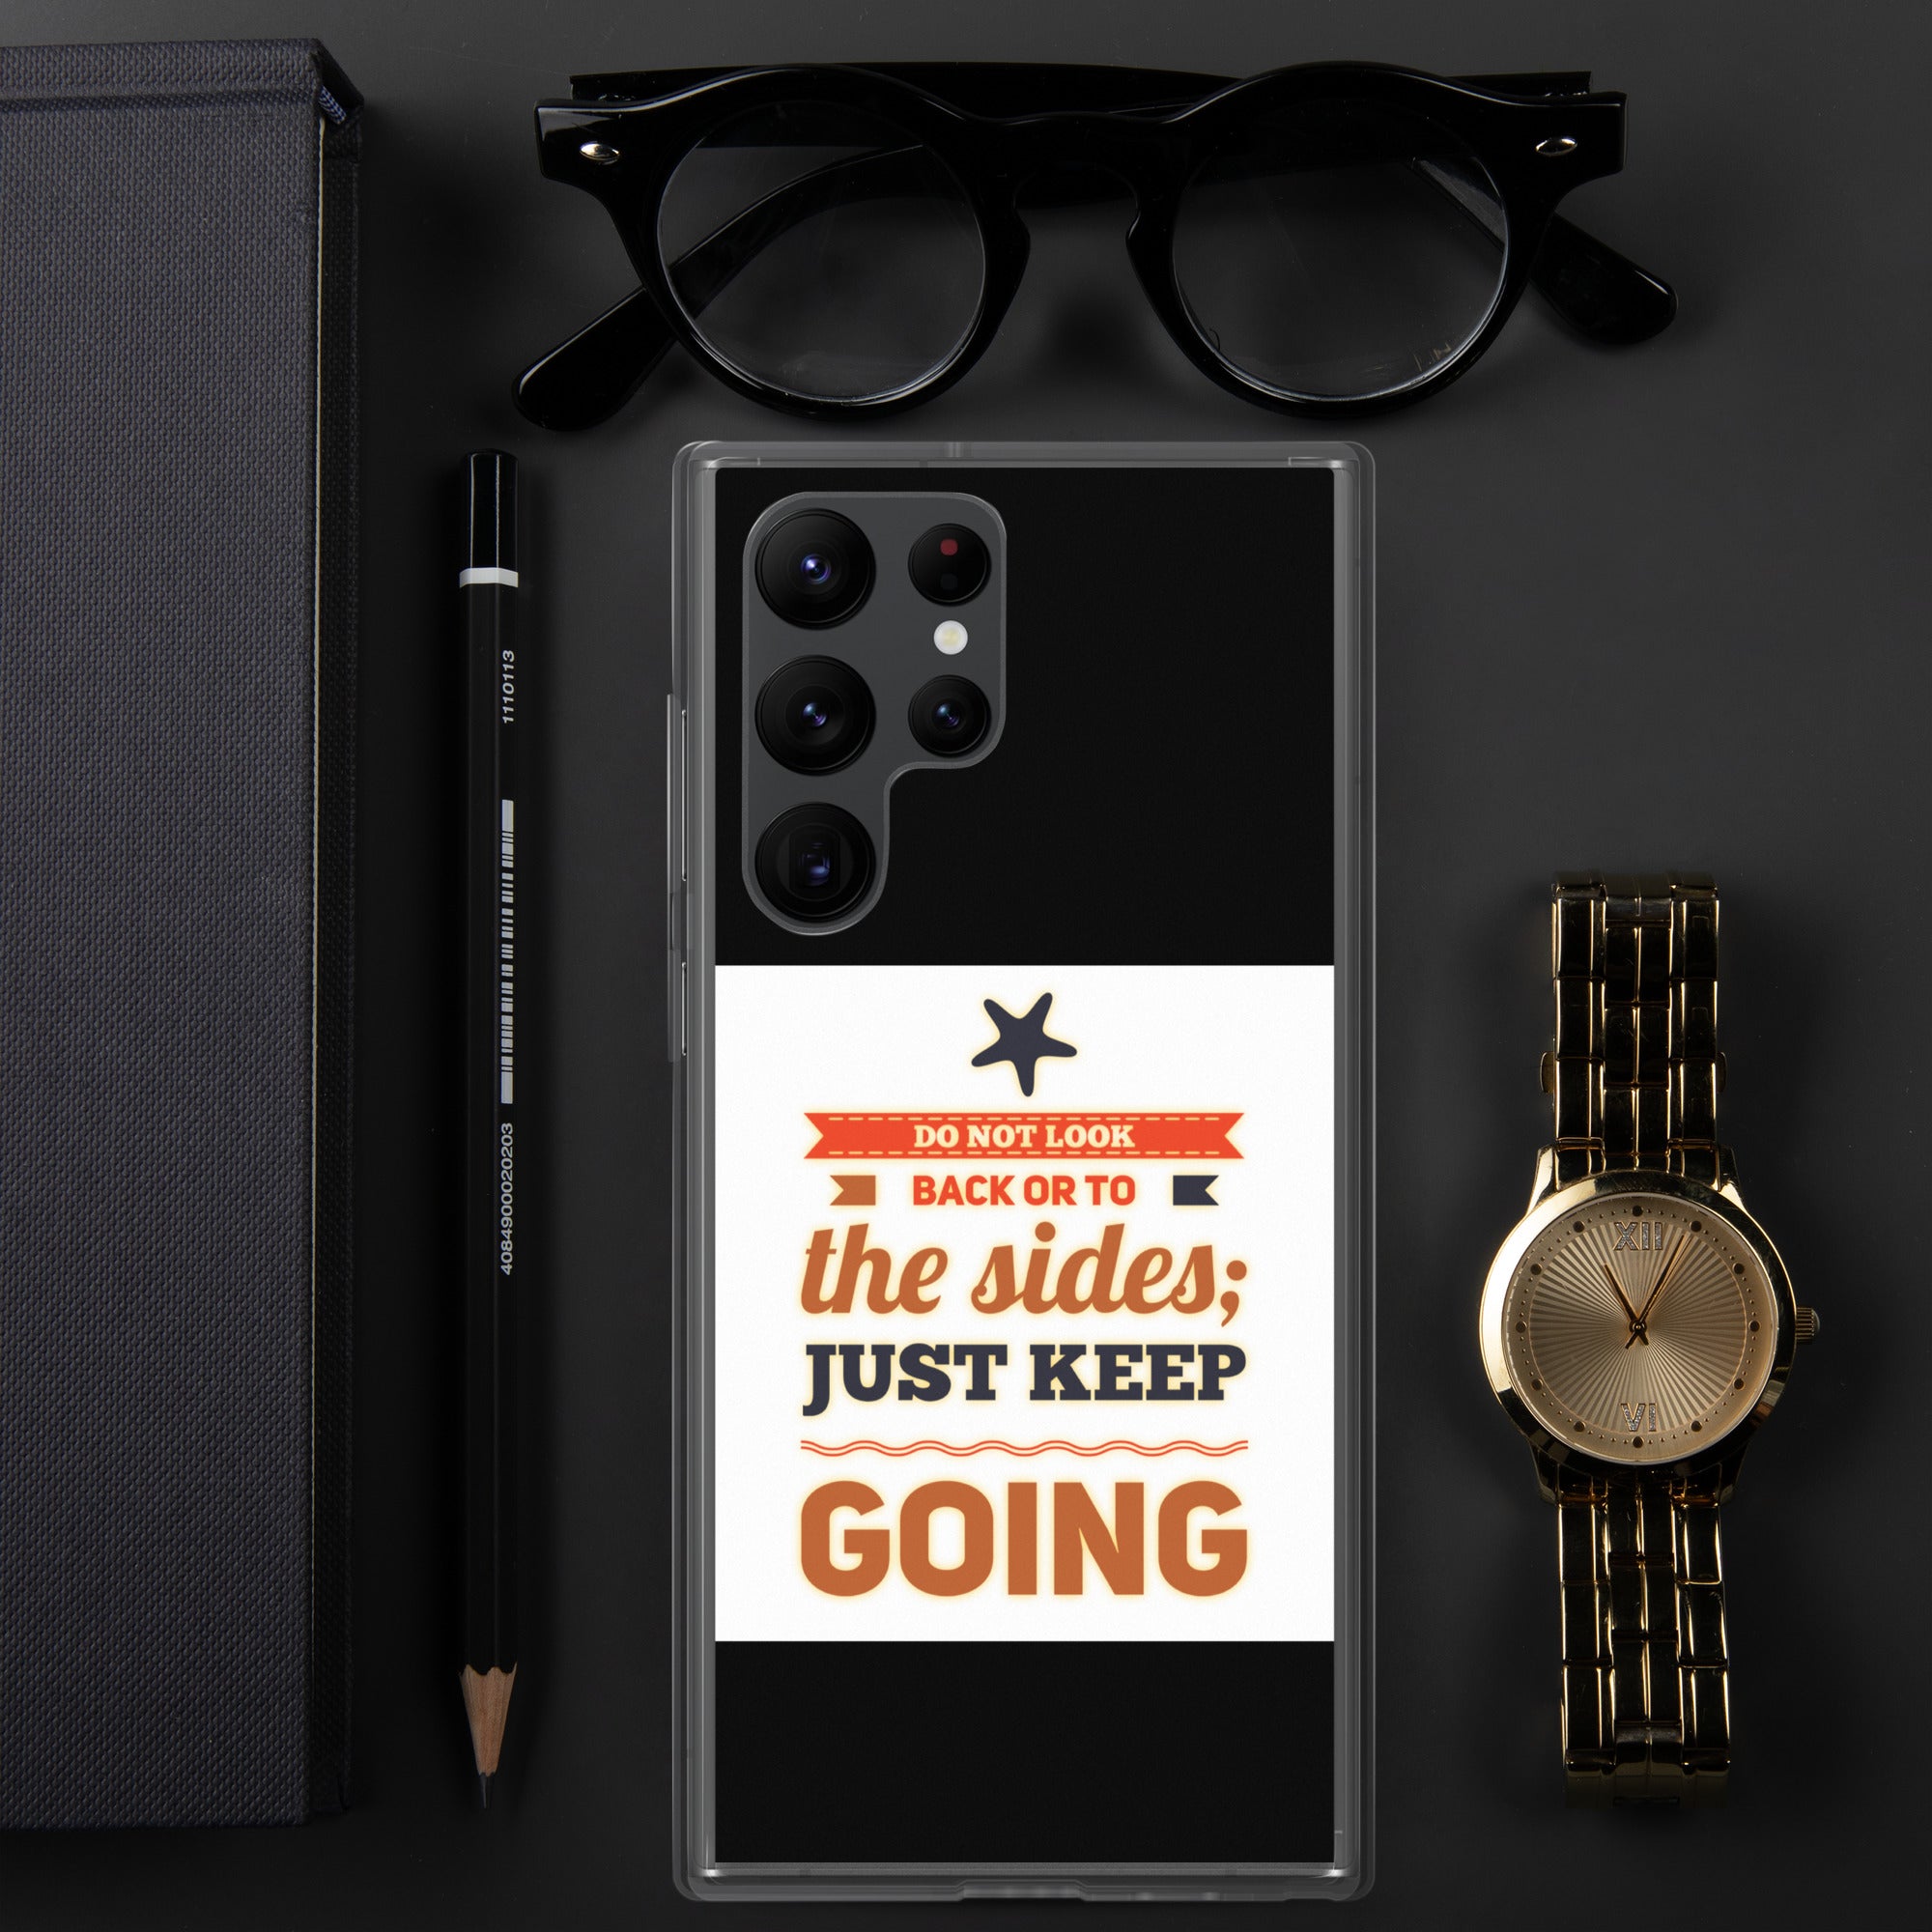 GloWell Designs - Samsung Case - Motivational Quote - Just Keep Going - GloWell Designs